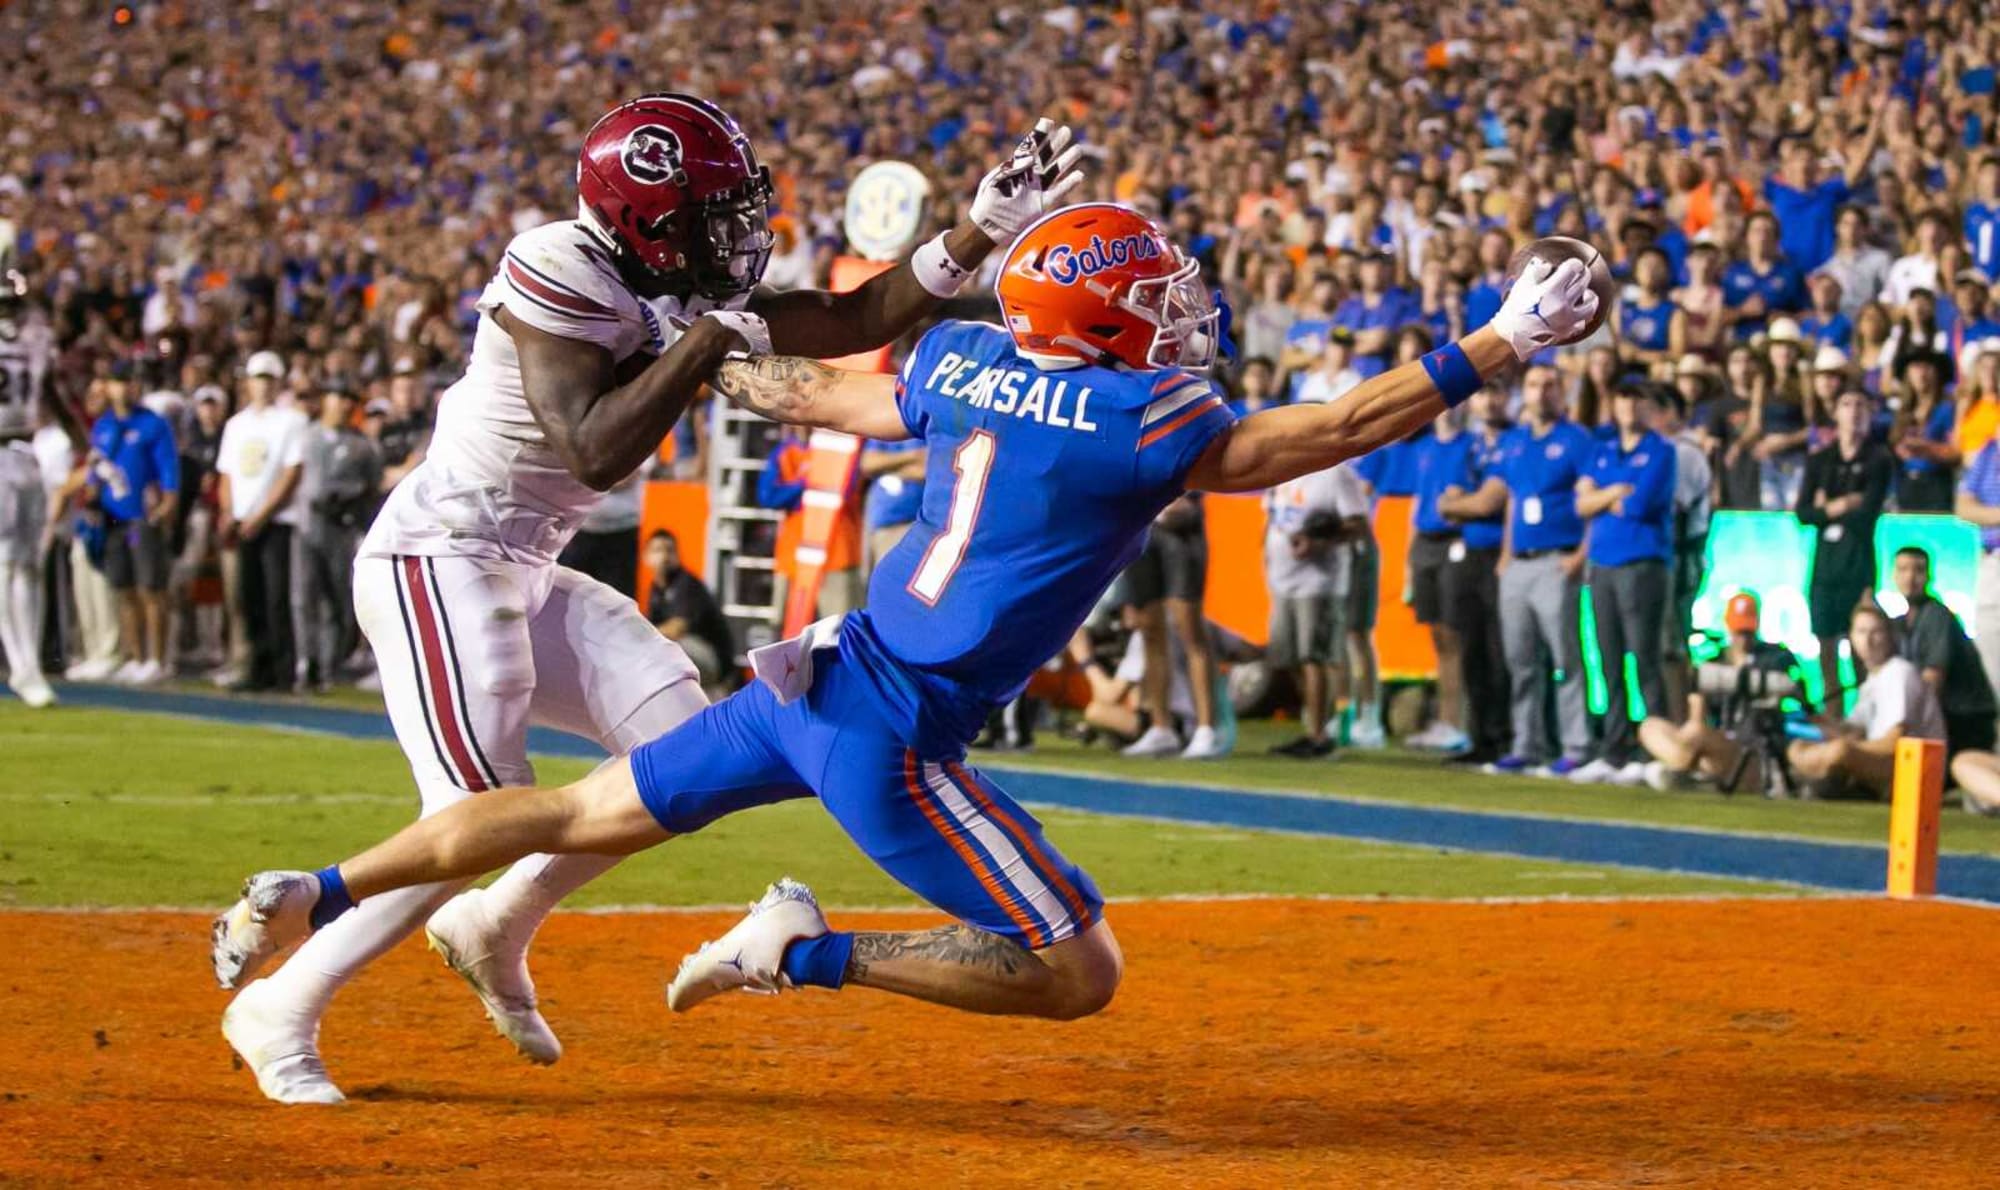 Florida football The Gators win projections are all over the place